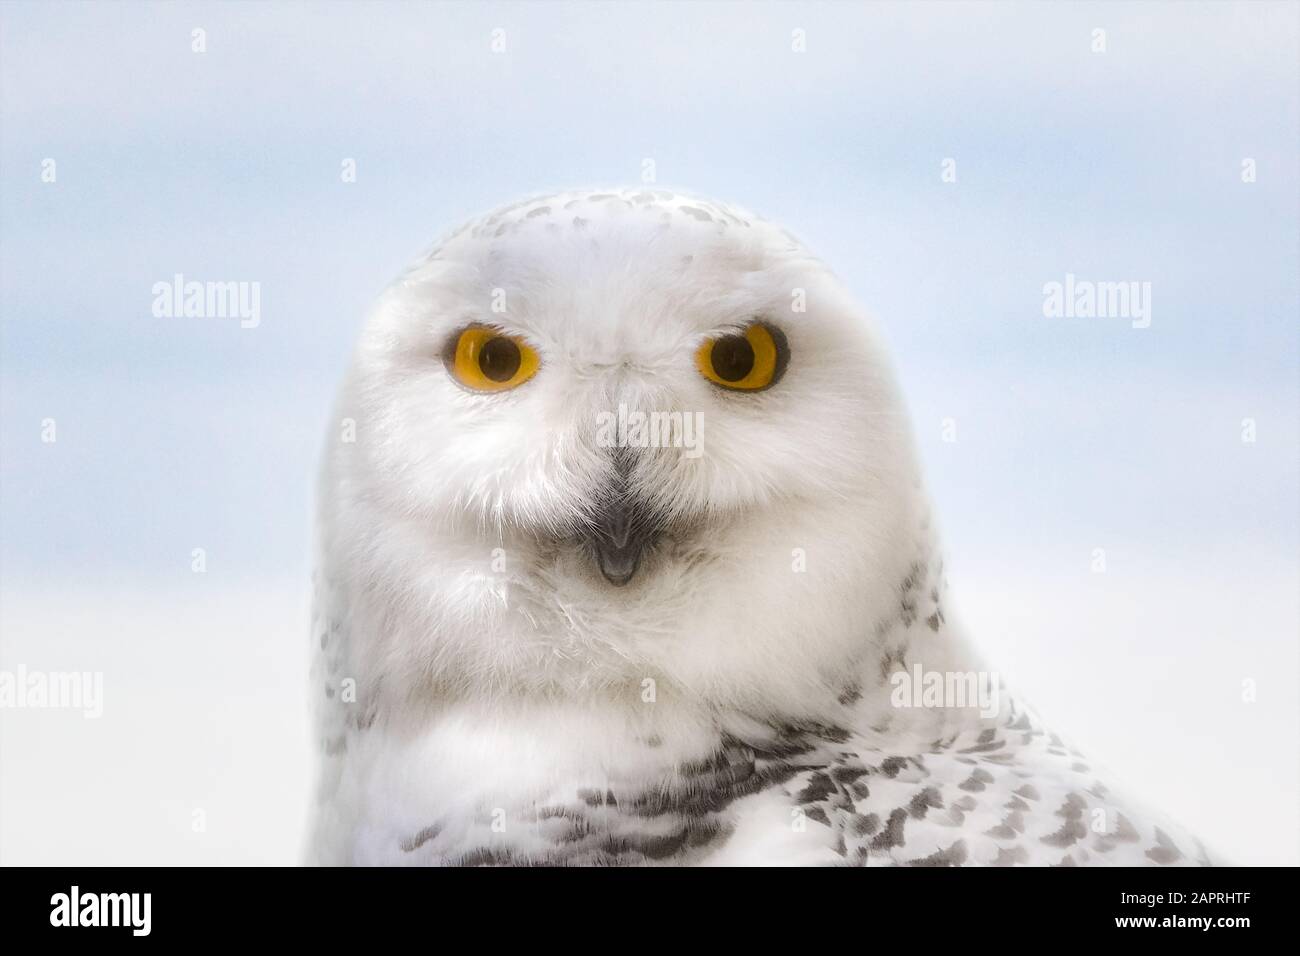 White Snowy Owl face extreme close up portrait Stock Photo